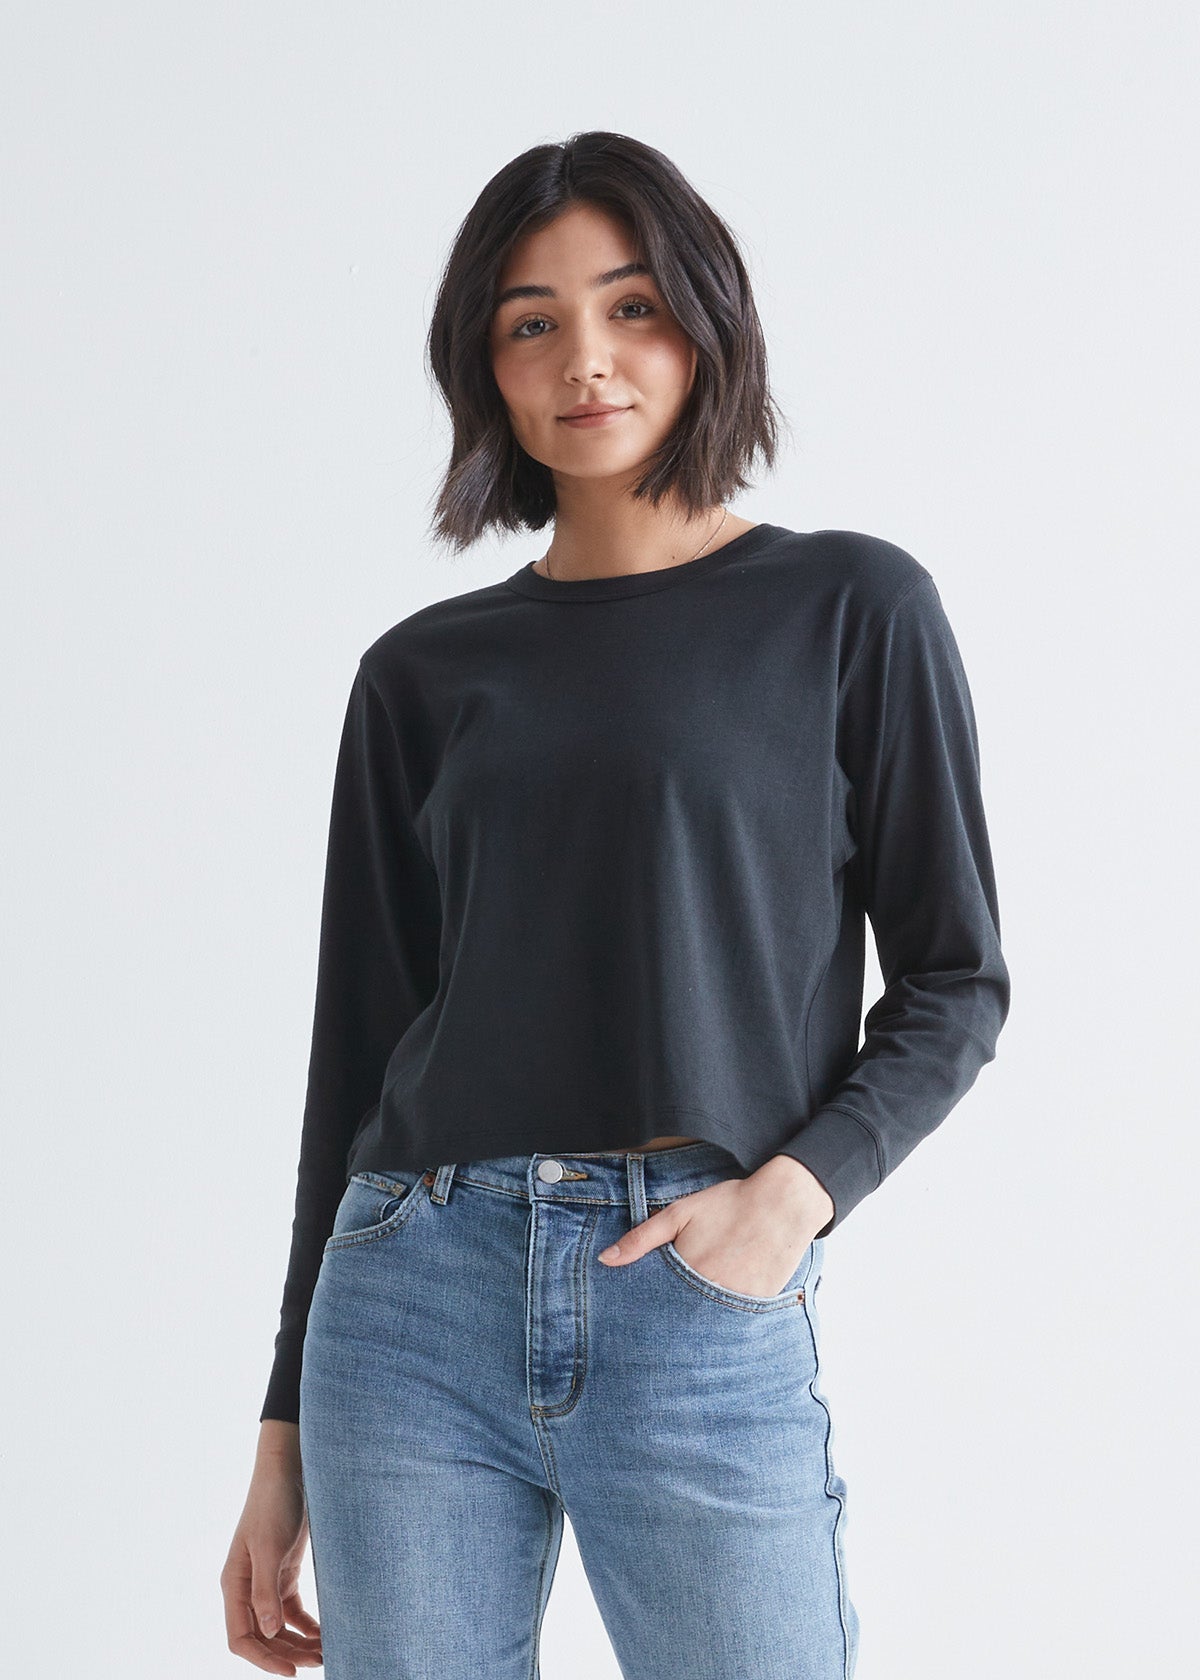 Women's Long-Sleeve Cotton-Blend Seamless Fabric Cropped Tee